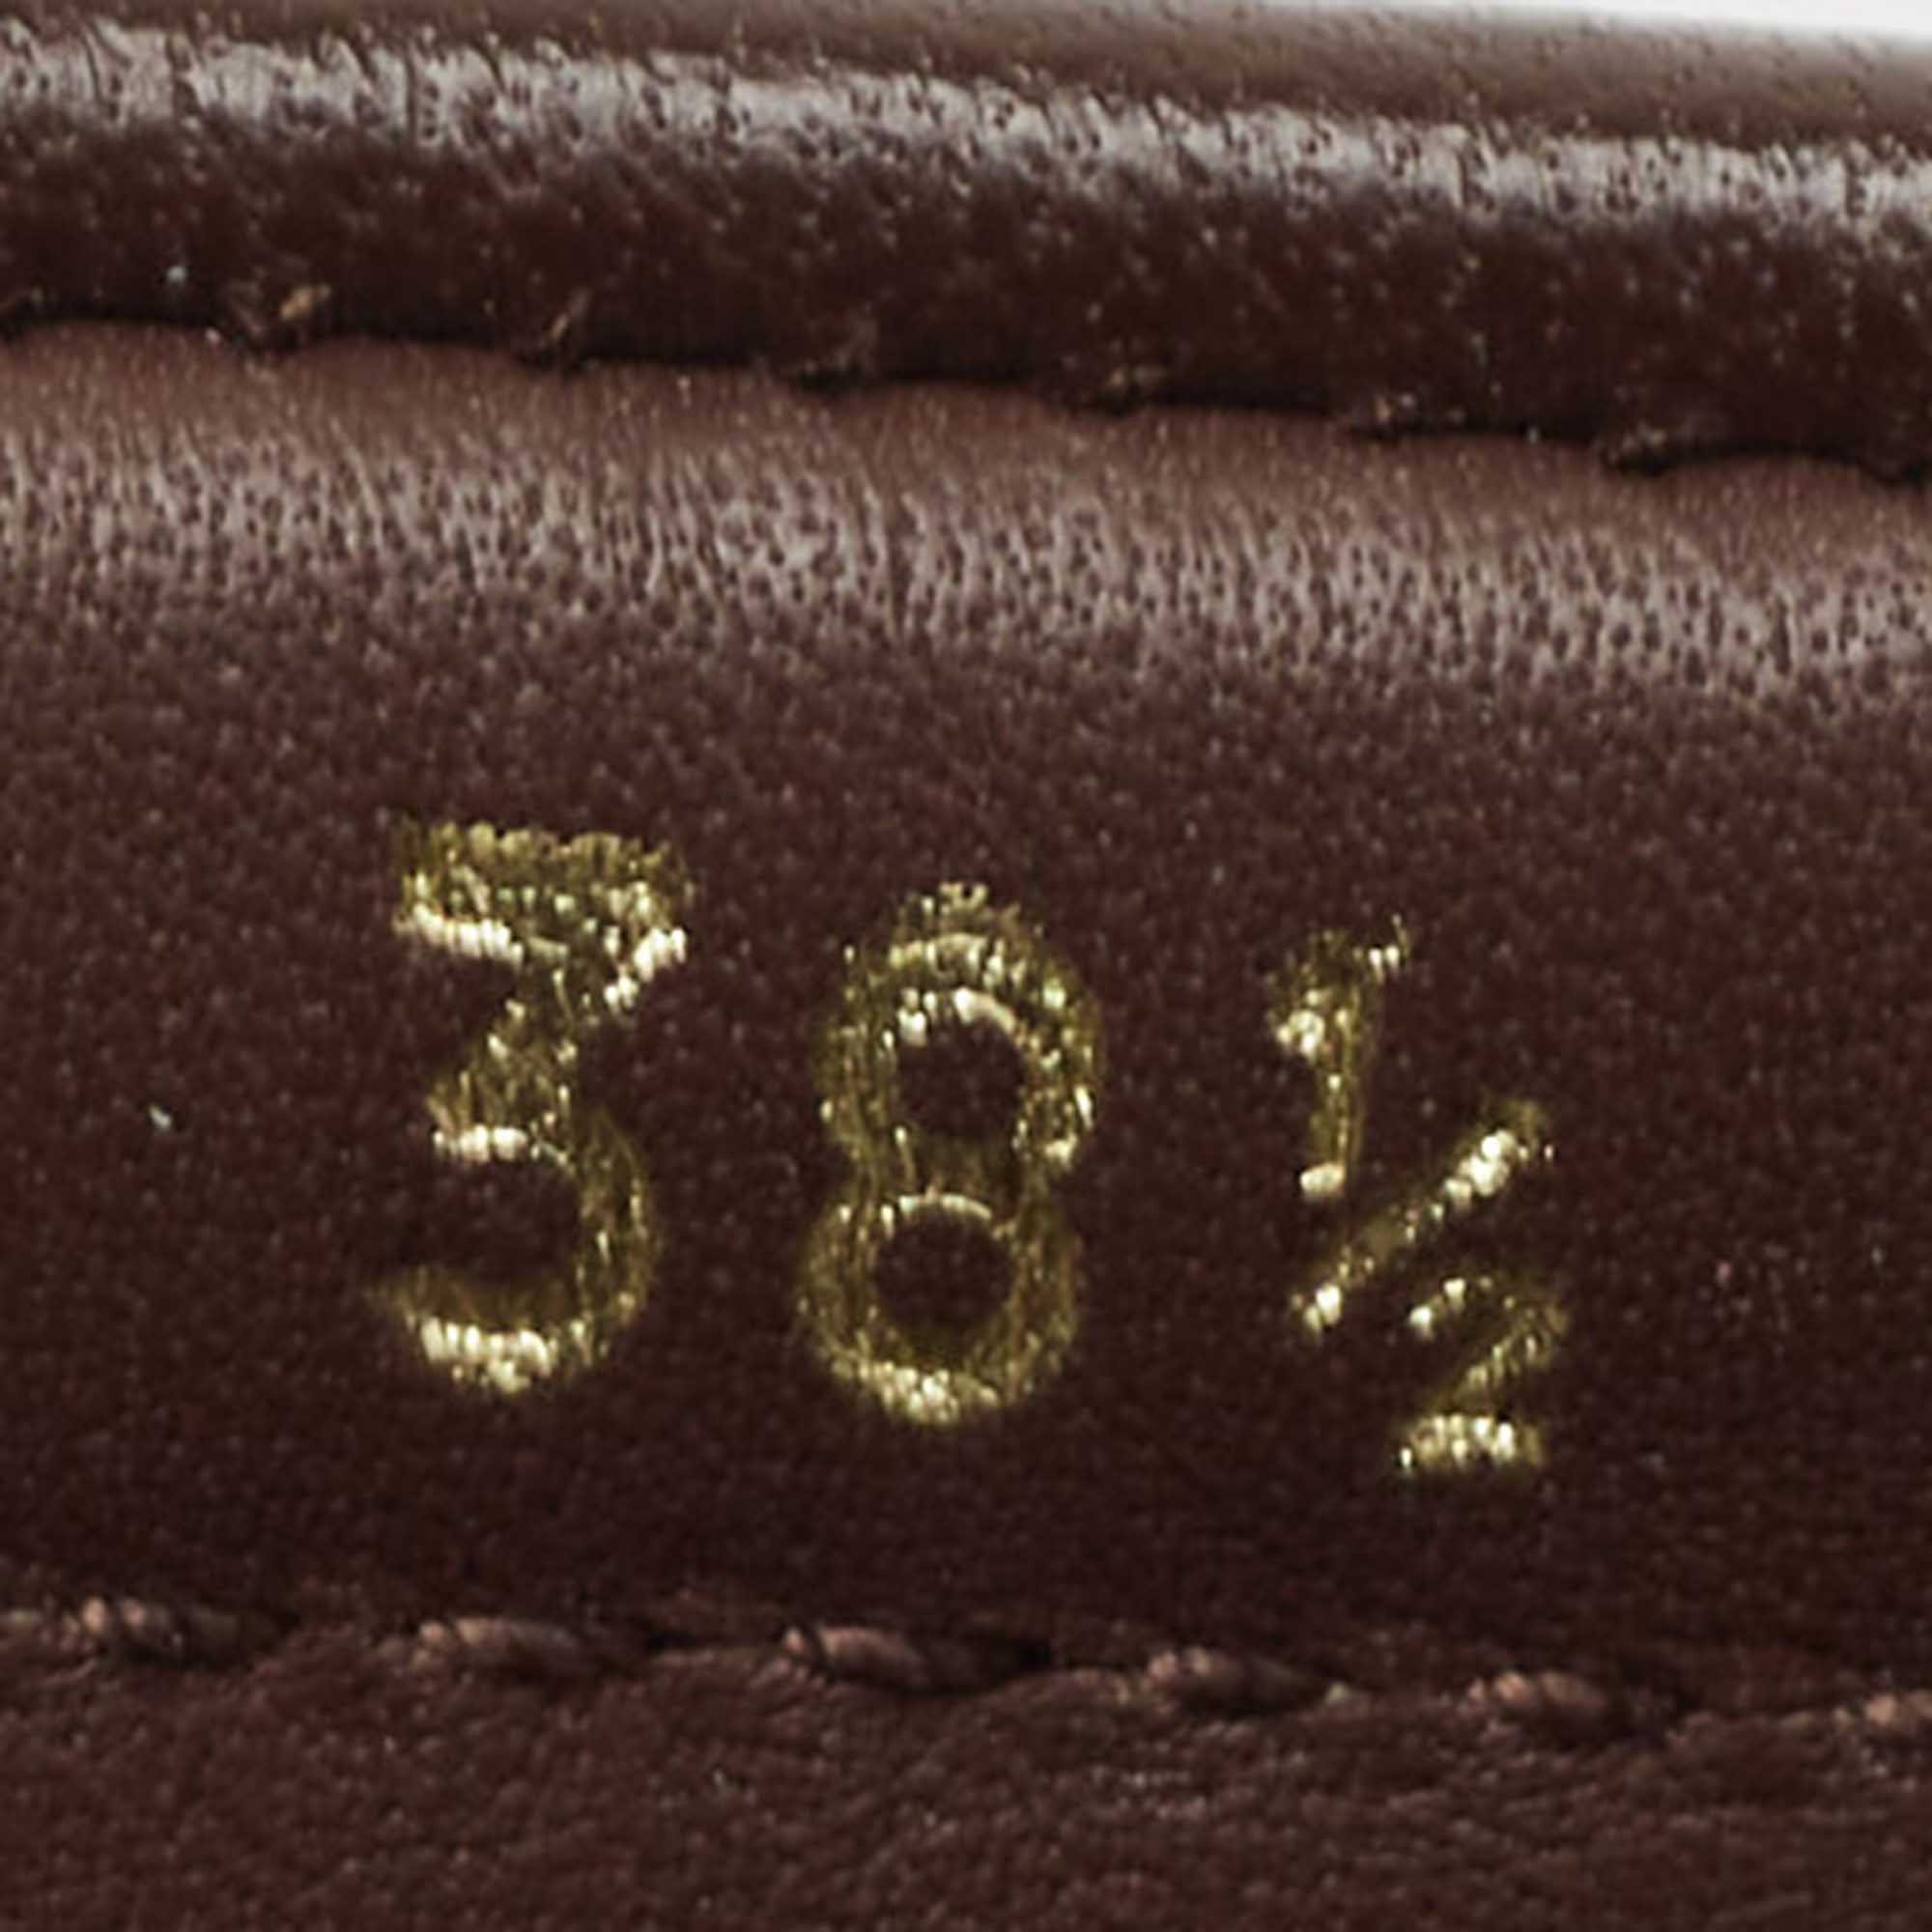 Prada Brown Leather Logo Detail Bow Loafers Size 38.5